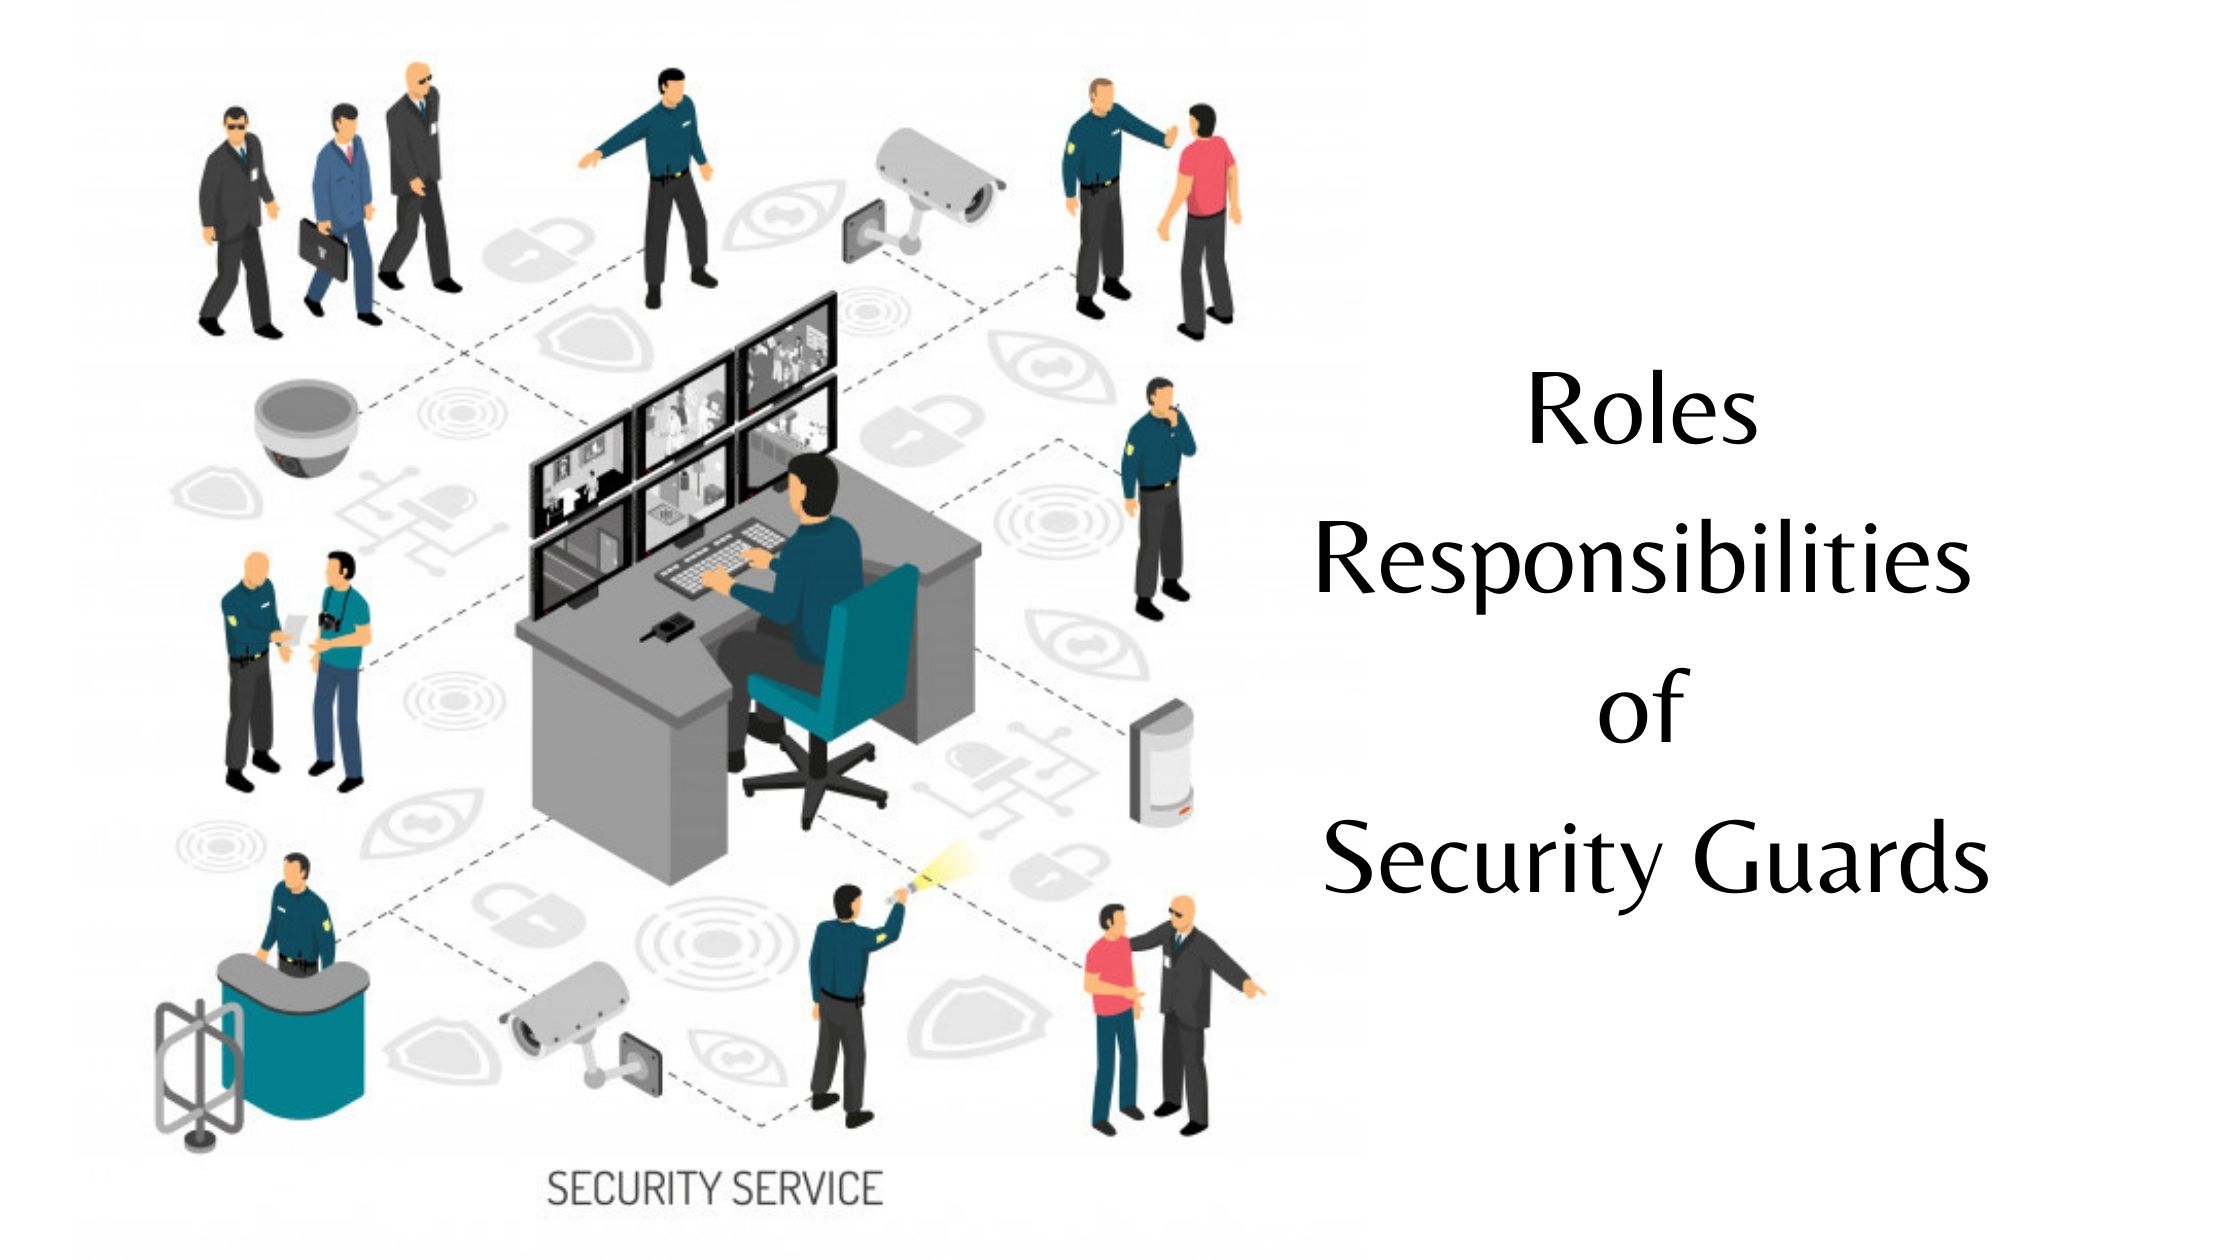 The Role of Security Guards